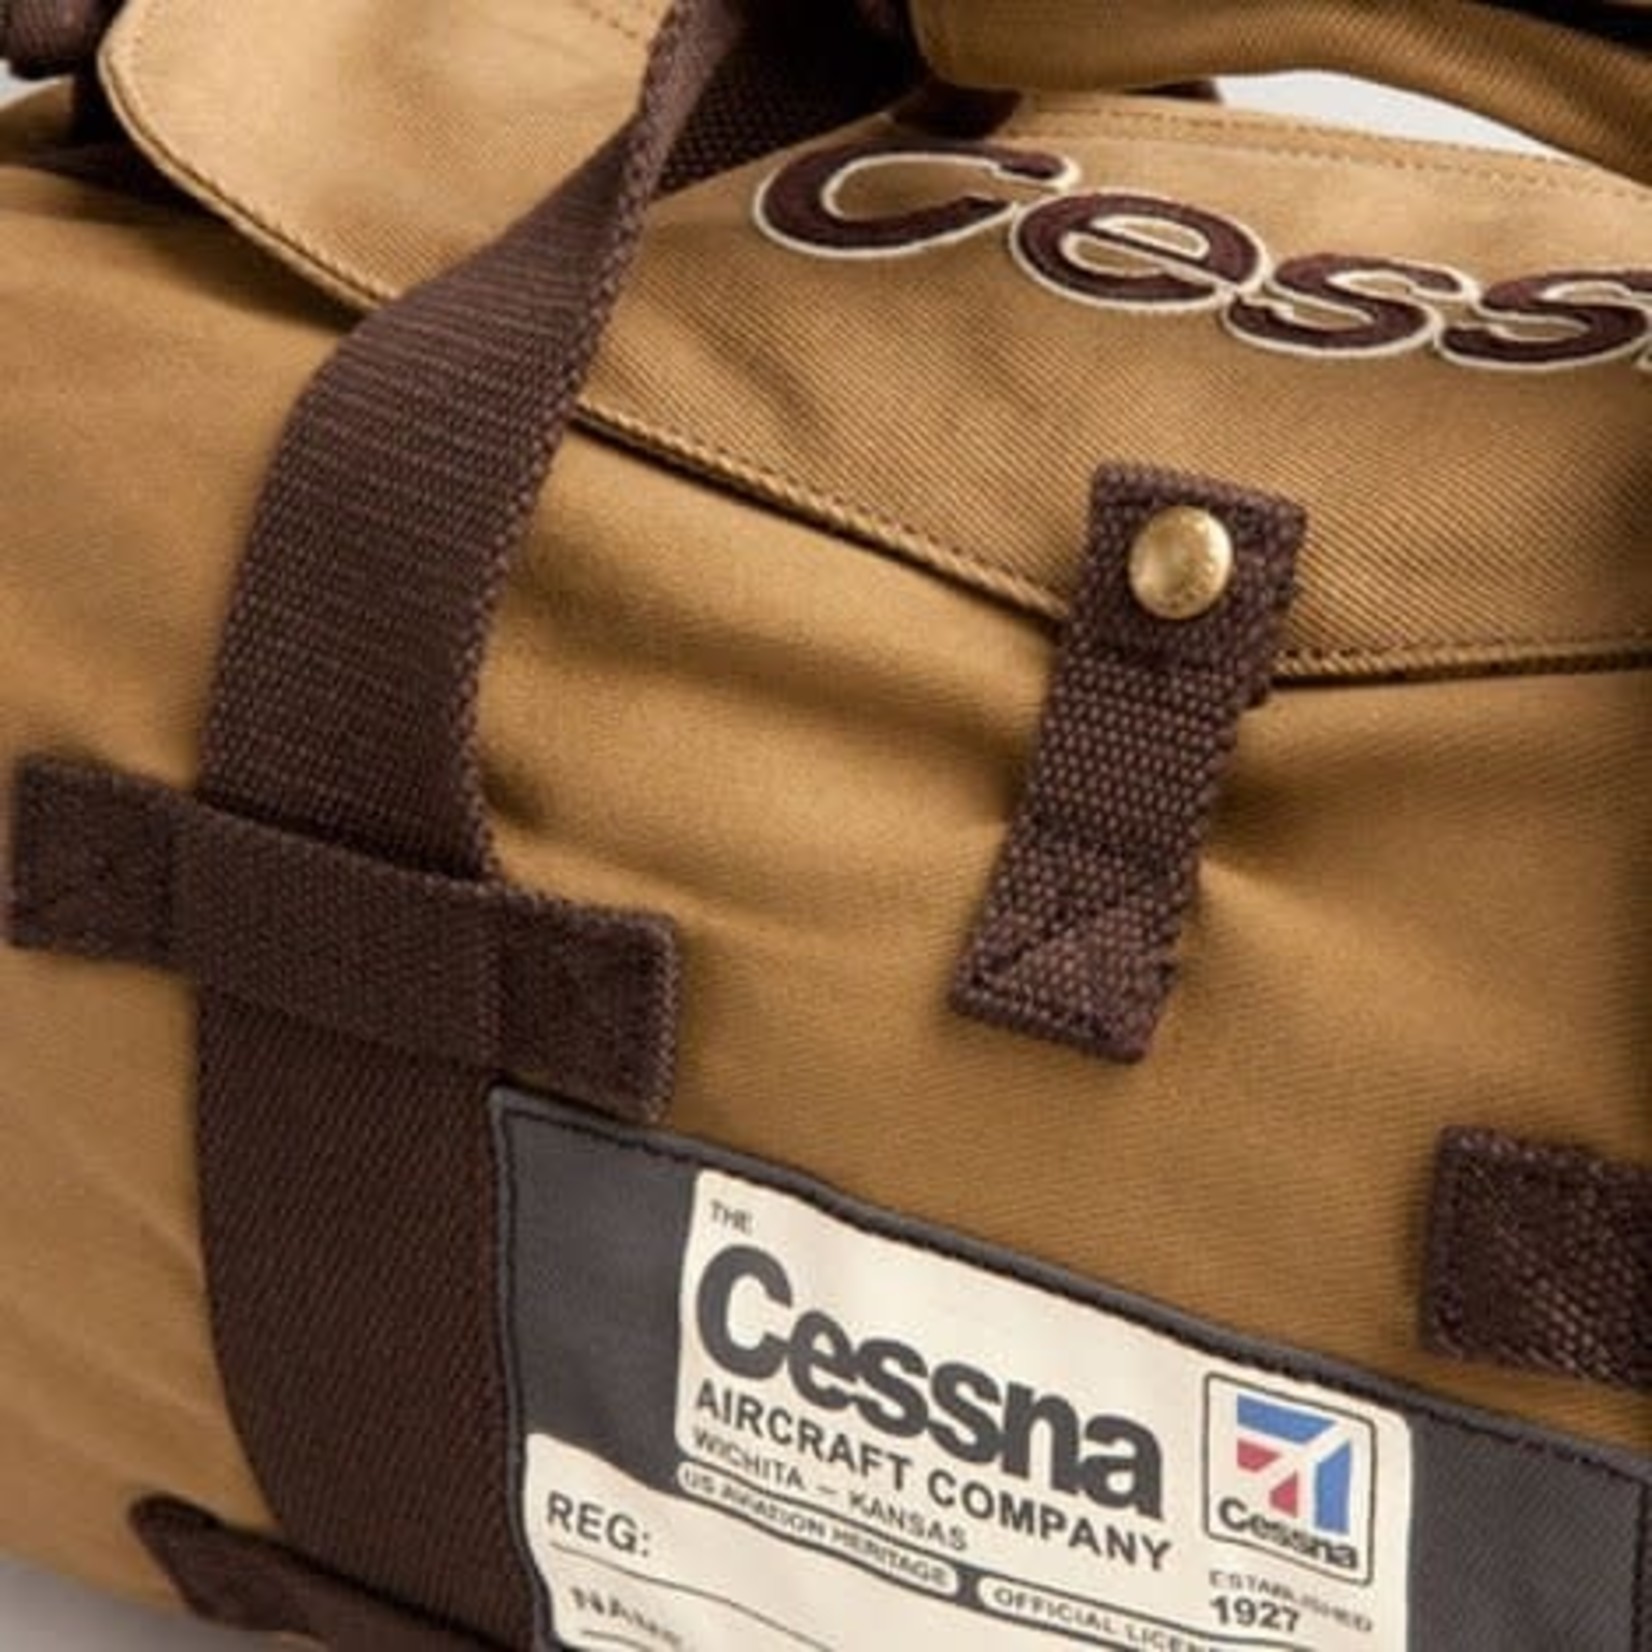 Aviation and Space Stow Bag Cessna